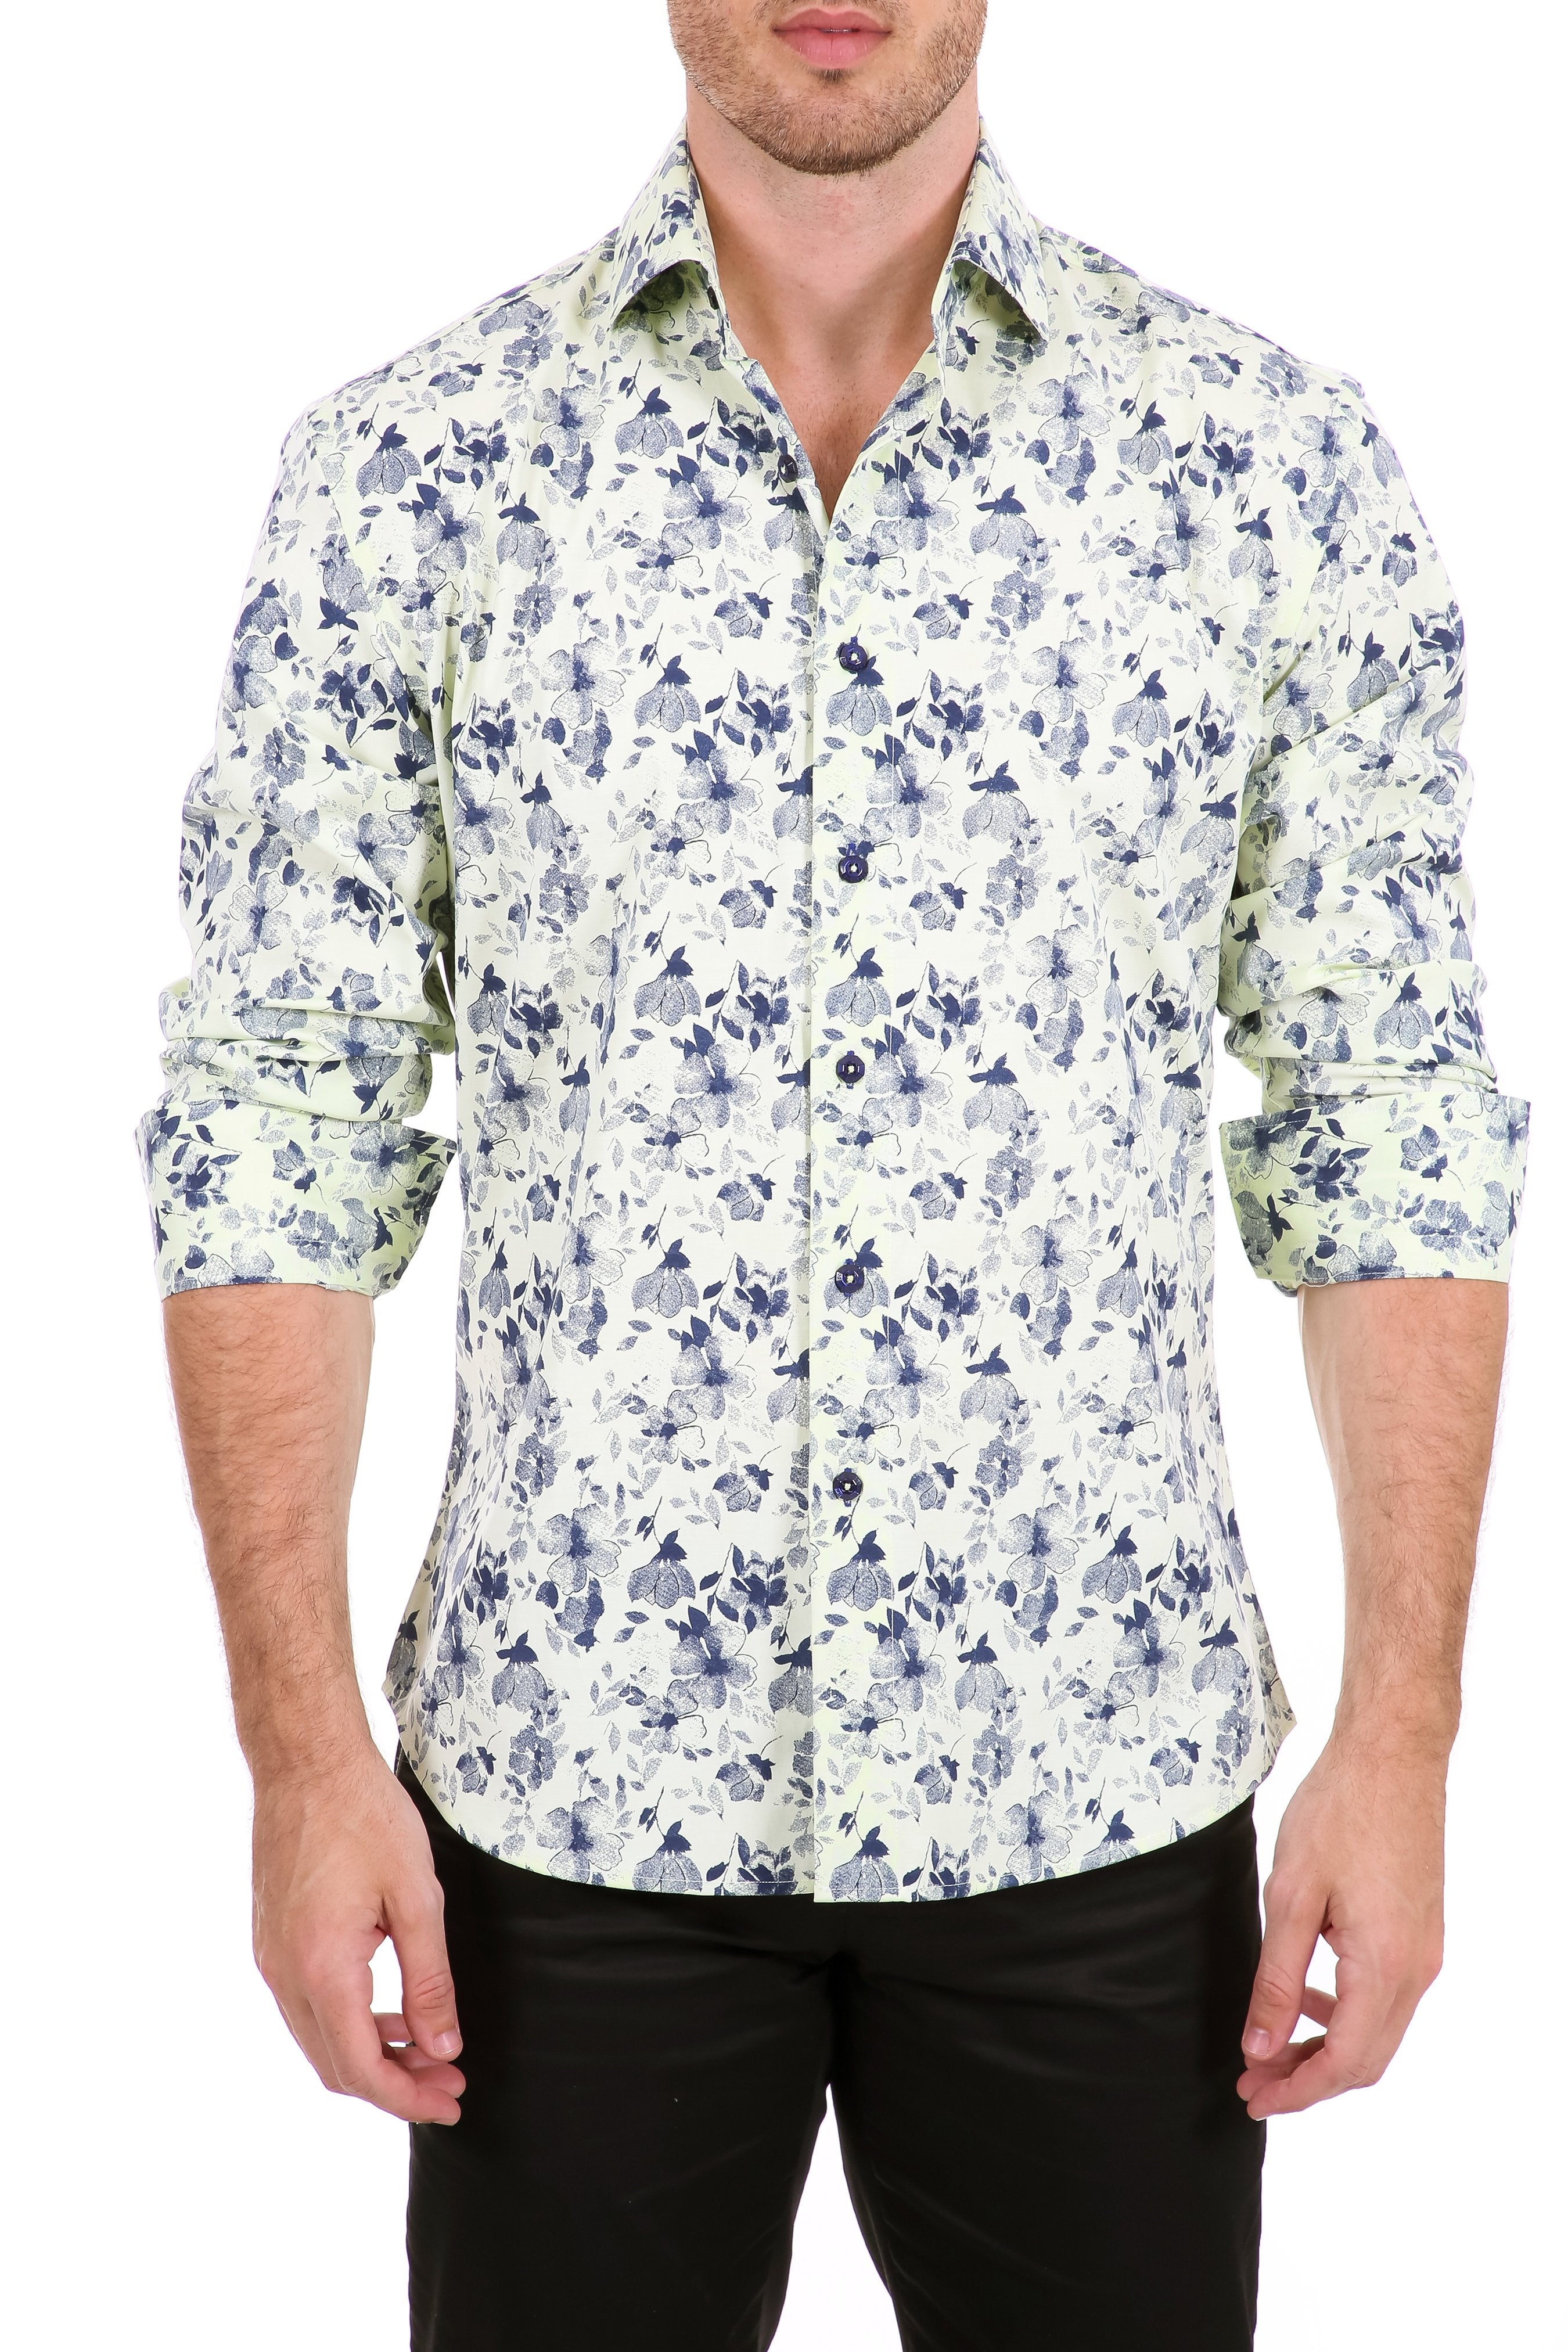 BLESSEDinHI Blessed Monstera Collection Men's Collared Shirt. 2XL / Men’s Button Up